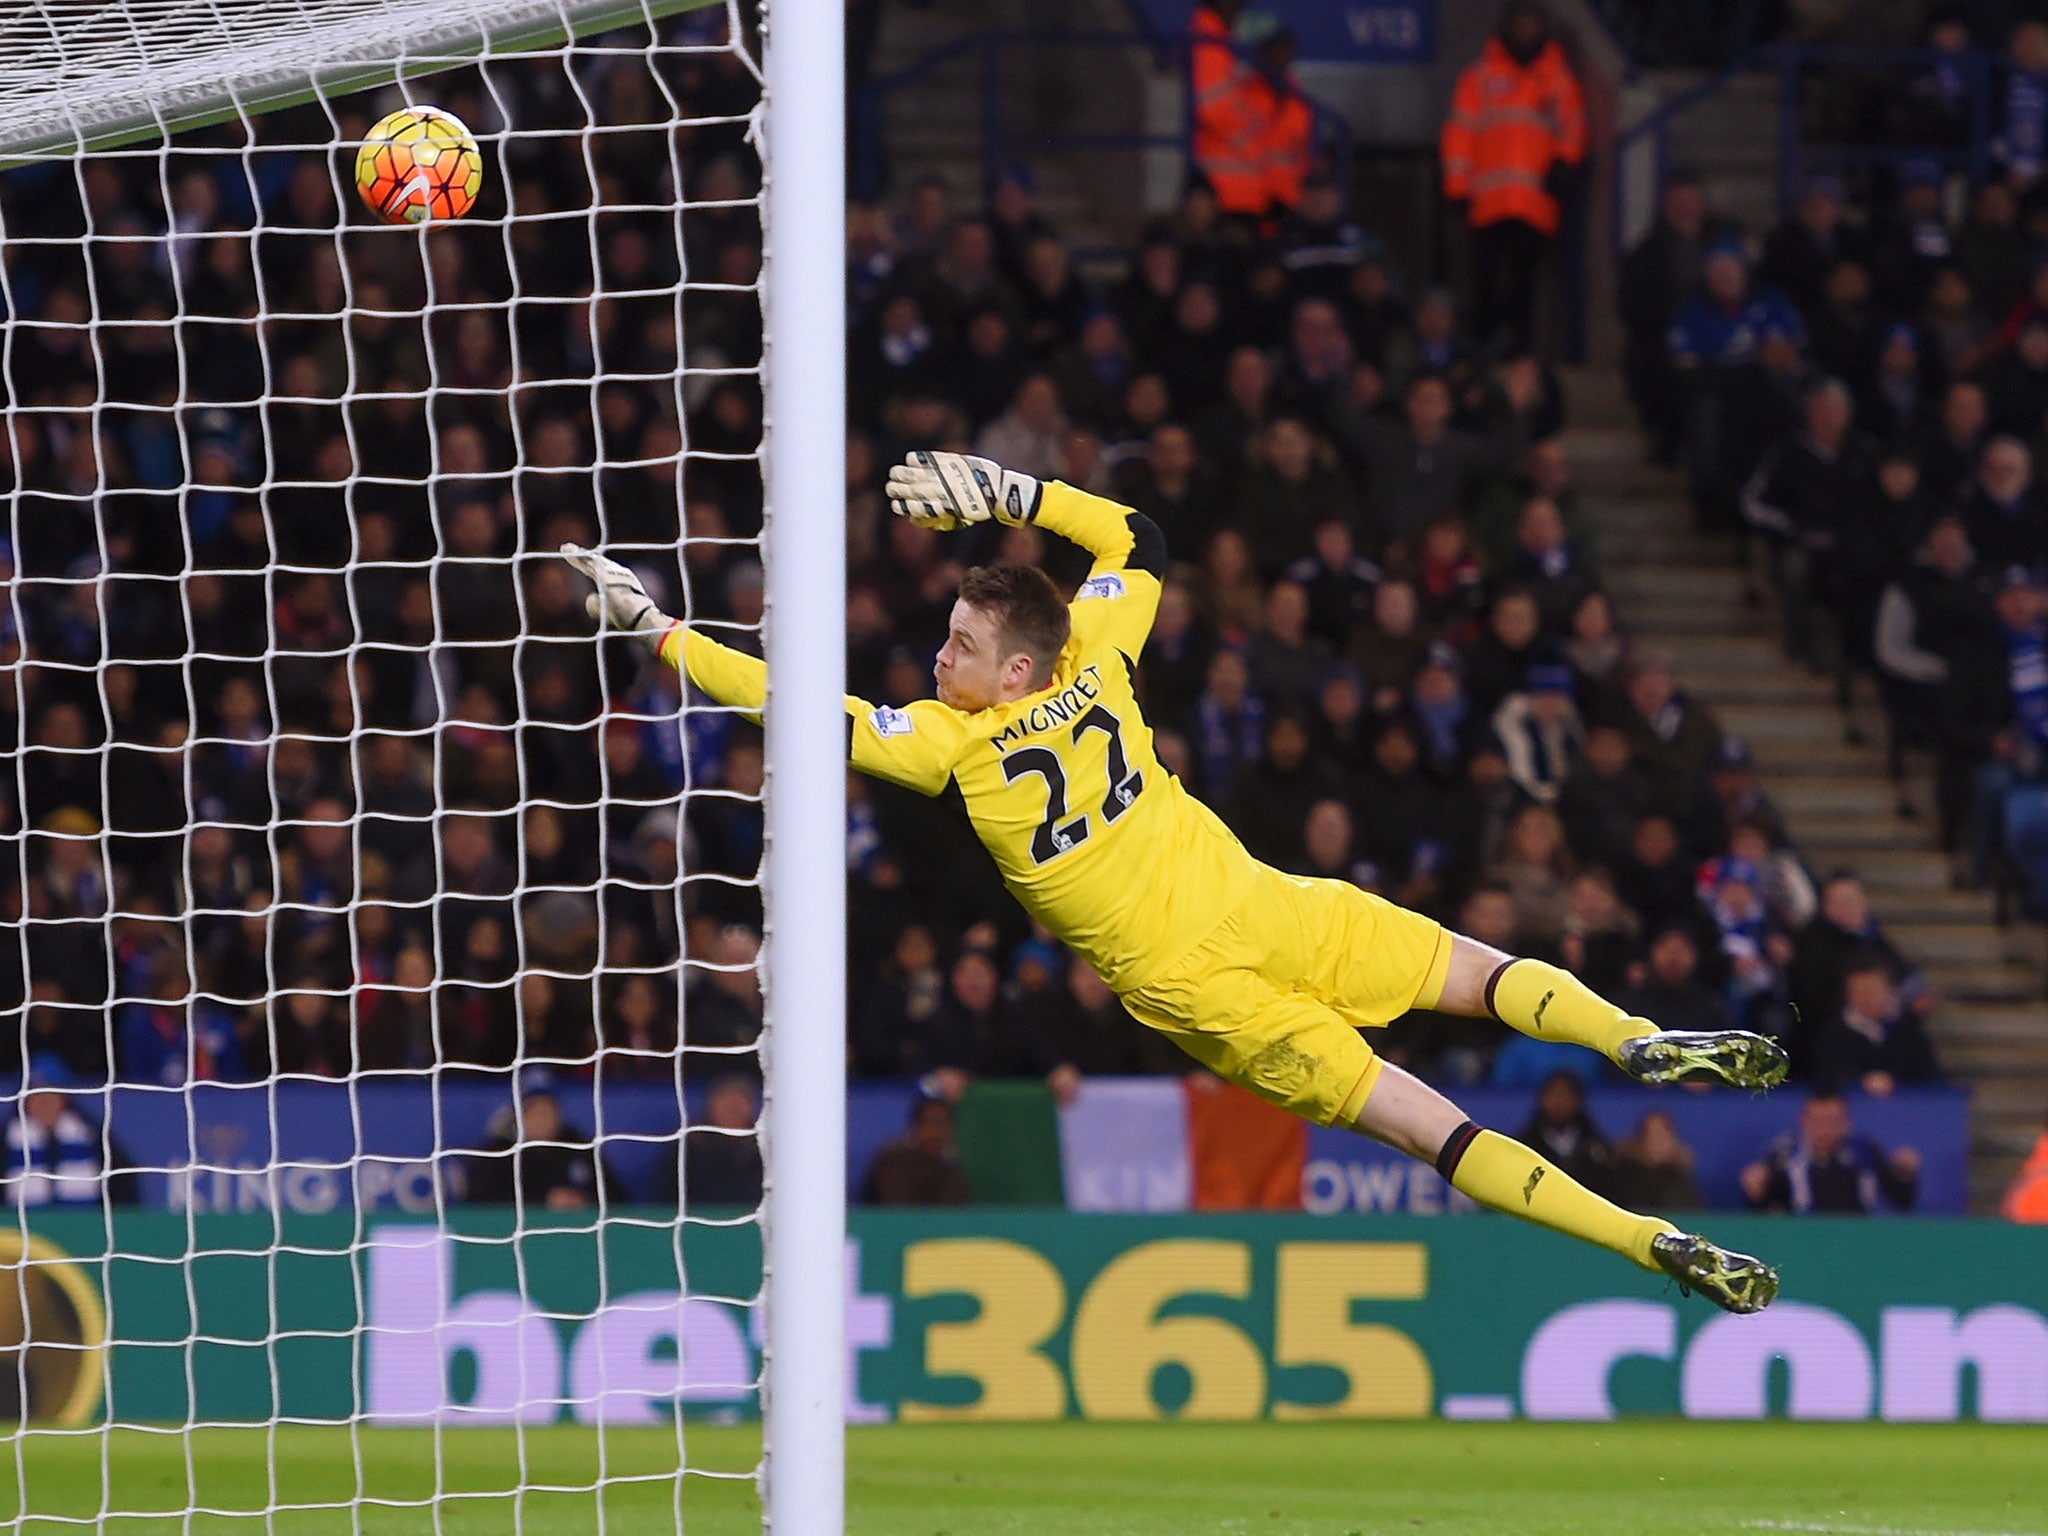 Simon Mignolet concedes from a Jamie Vardy strike